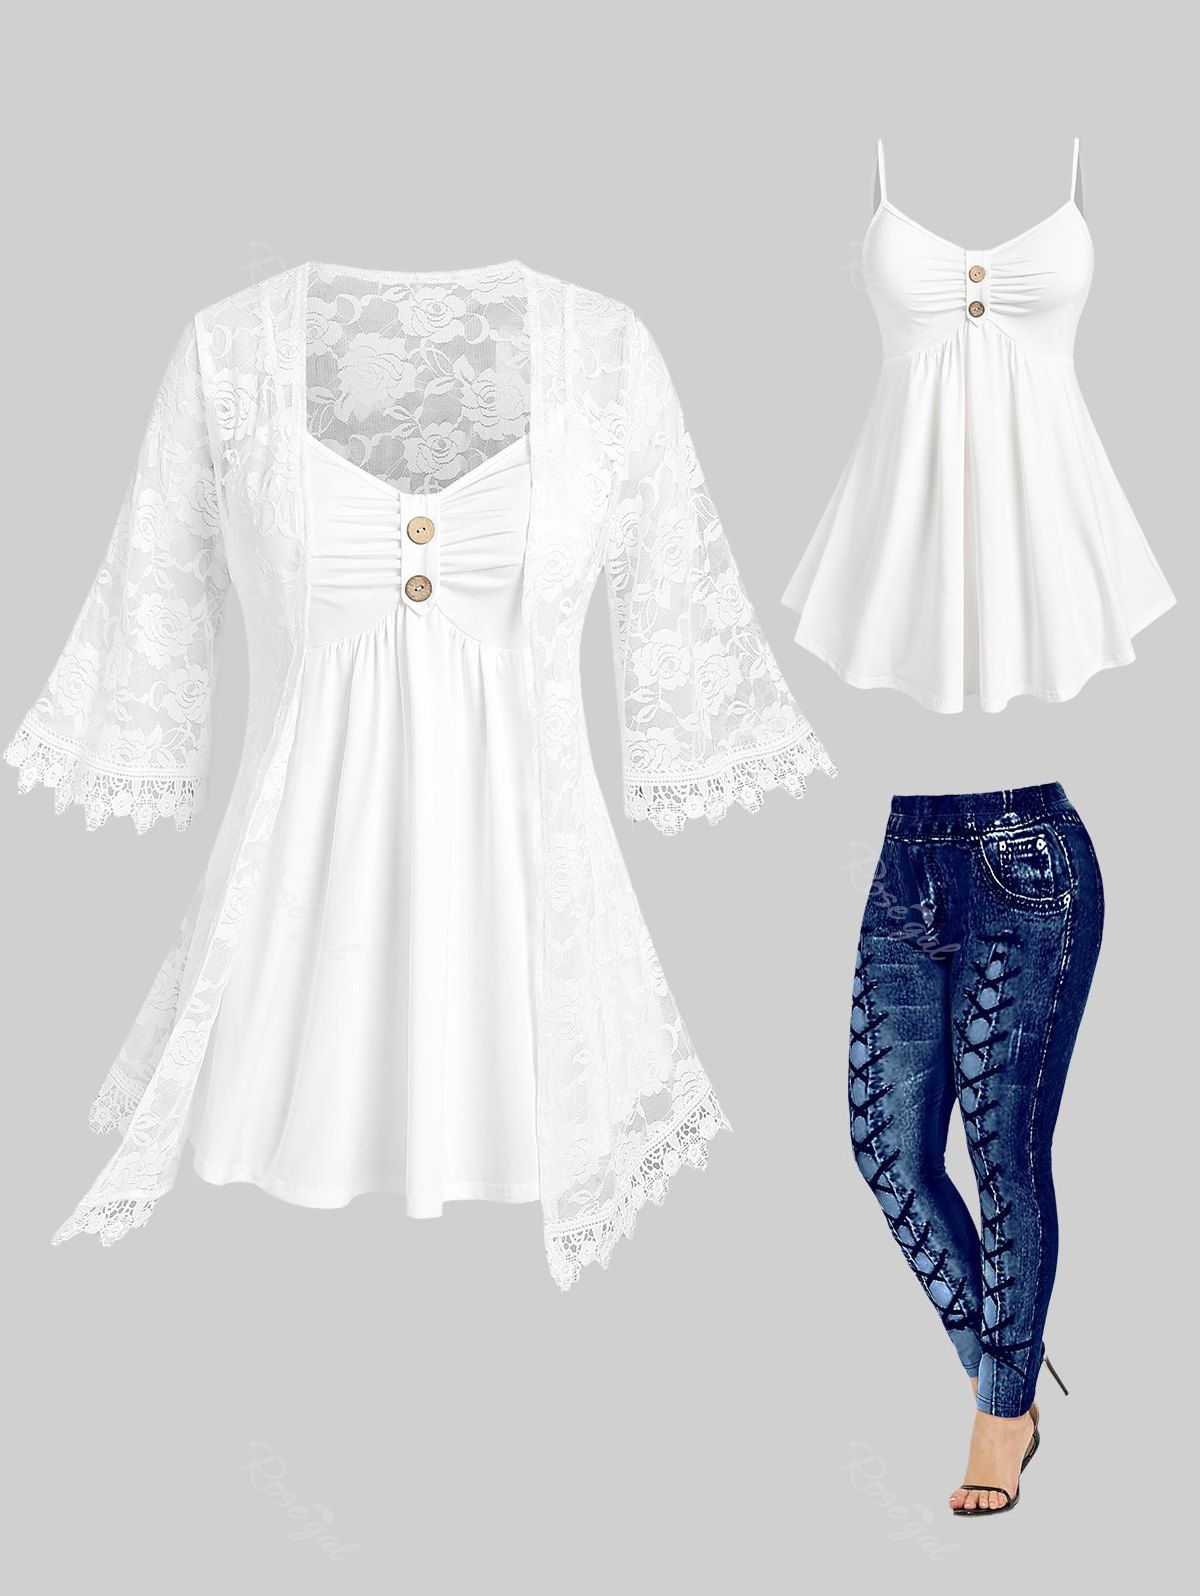 Shops Sheer Lace Cardigan and Cami Top and 3D Printed Leggings Plus Size Summer Outfit  